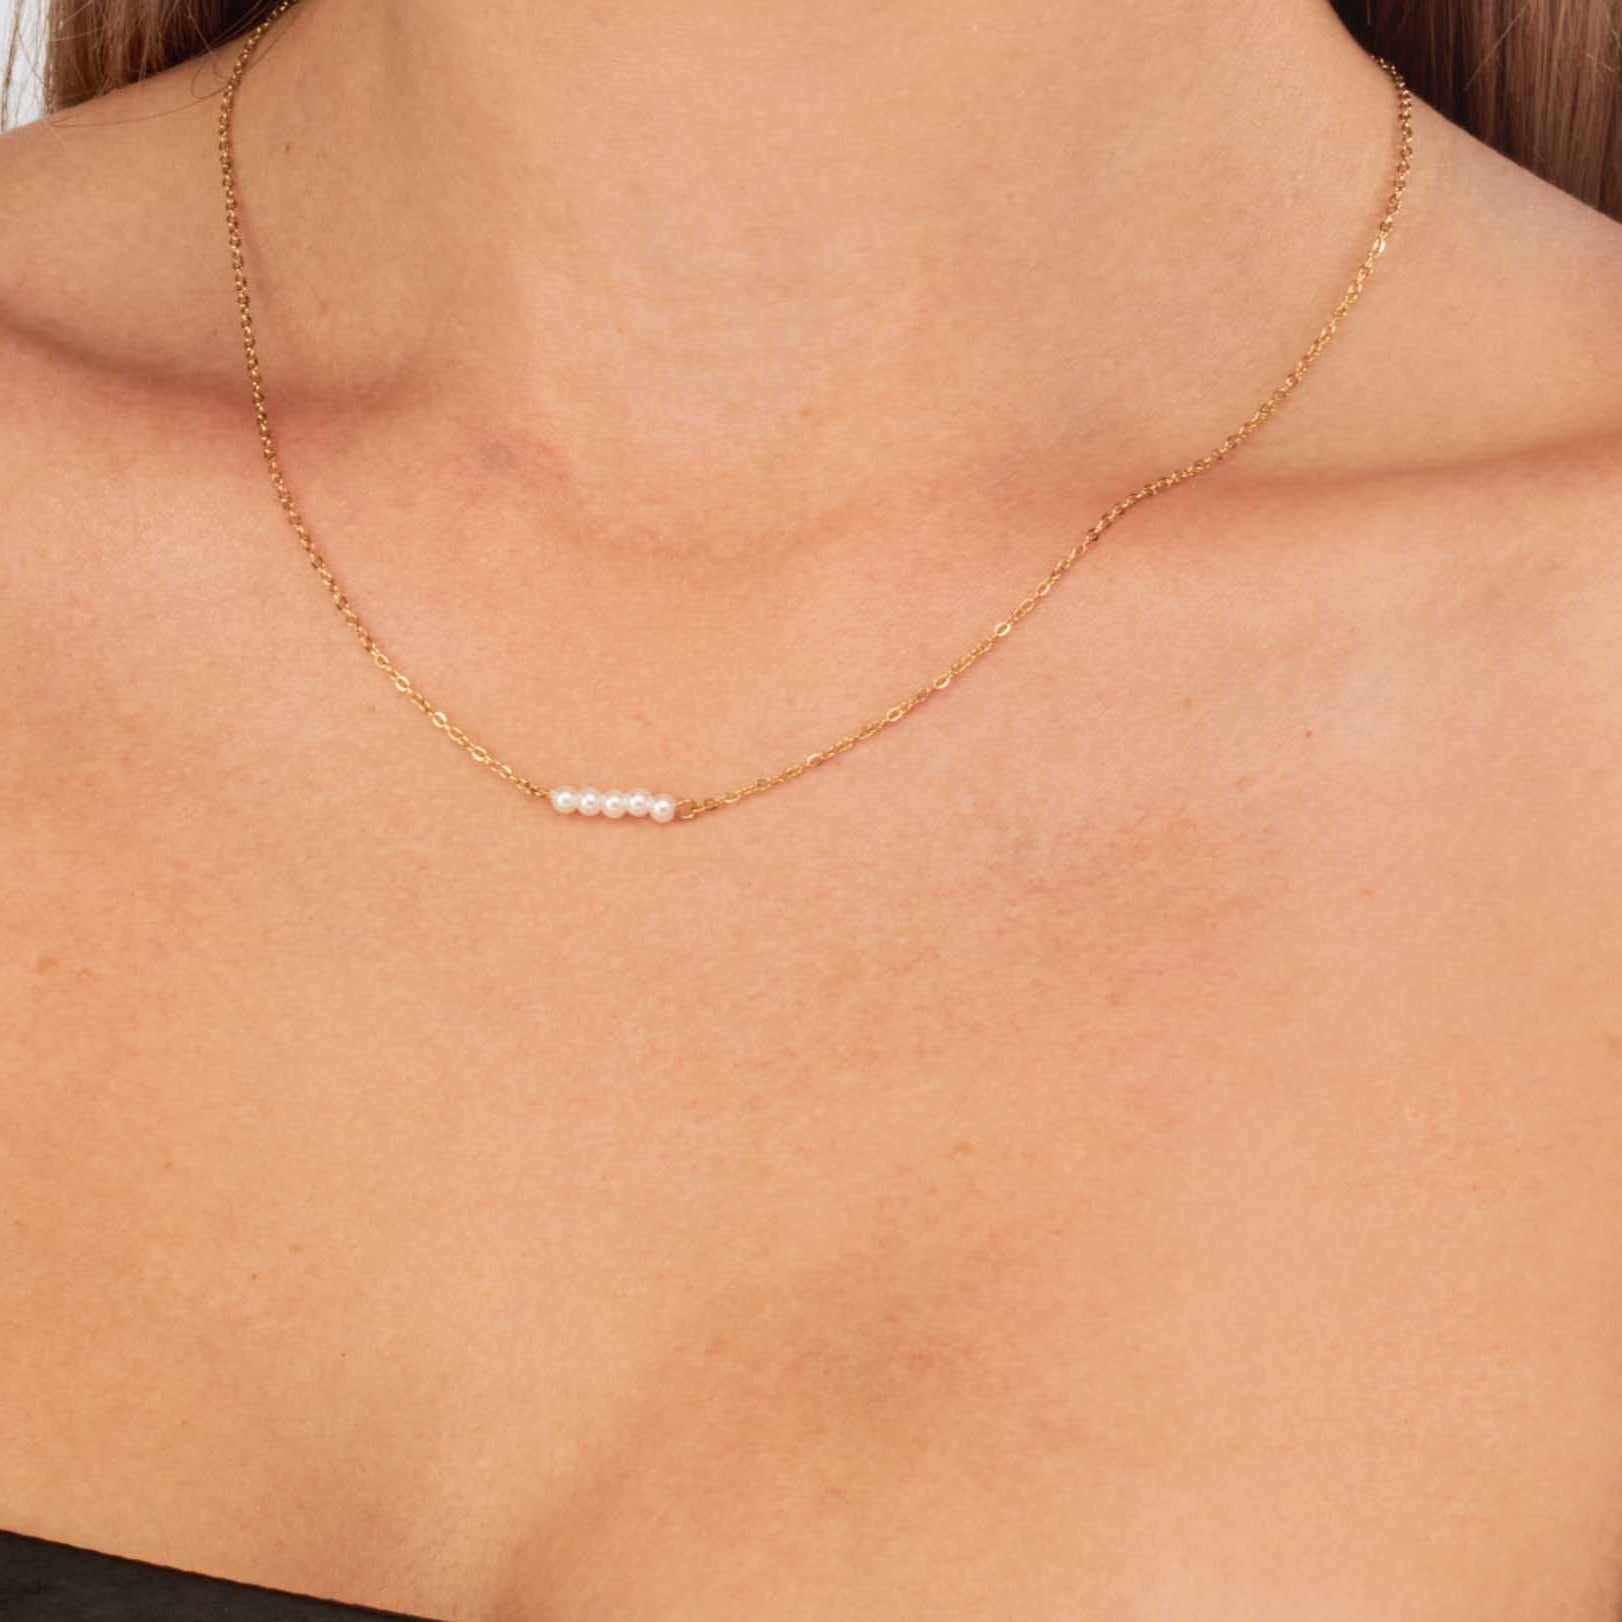 Karlie - 18k Gold White Pearl Bar Necklace - Ocean Wave Jewelry